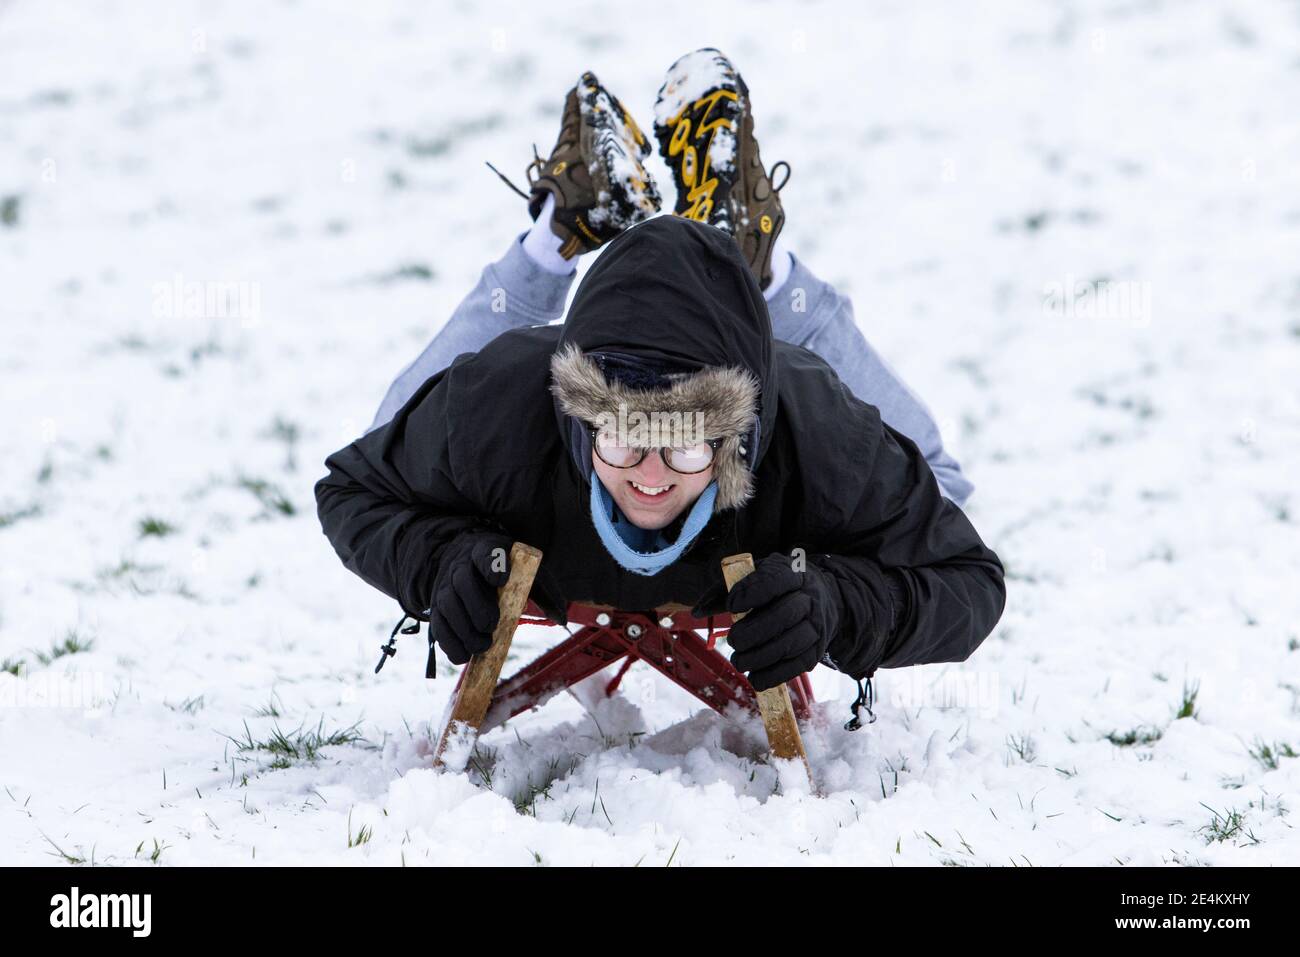 Chippenham, Wiltshire, UK. 24th January, 2021. As Chippenham residents wake up to their first snow of the year, a boy enjoying the snow before it thaws is pictured in a local park in Chippenham as he speeds down a hill on a sledge. Credit: Lynchpics/Alamy Live News Stock Photo